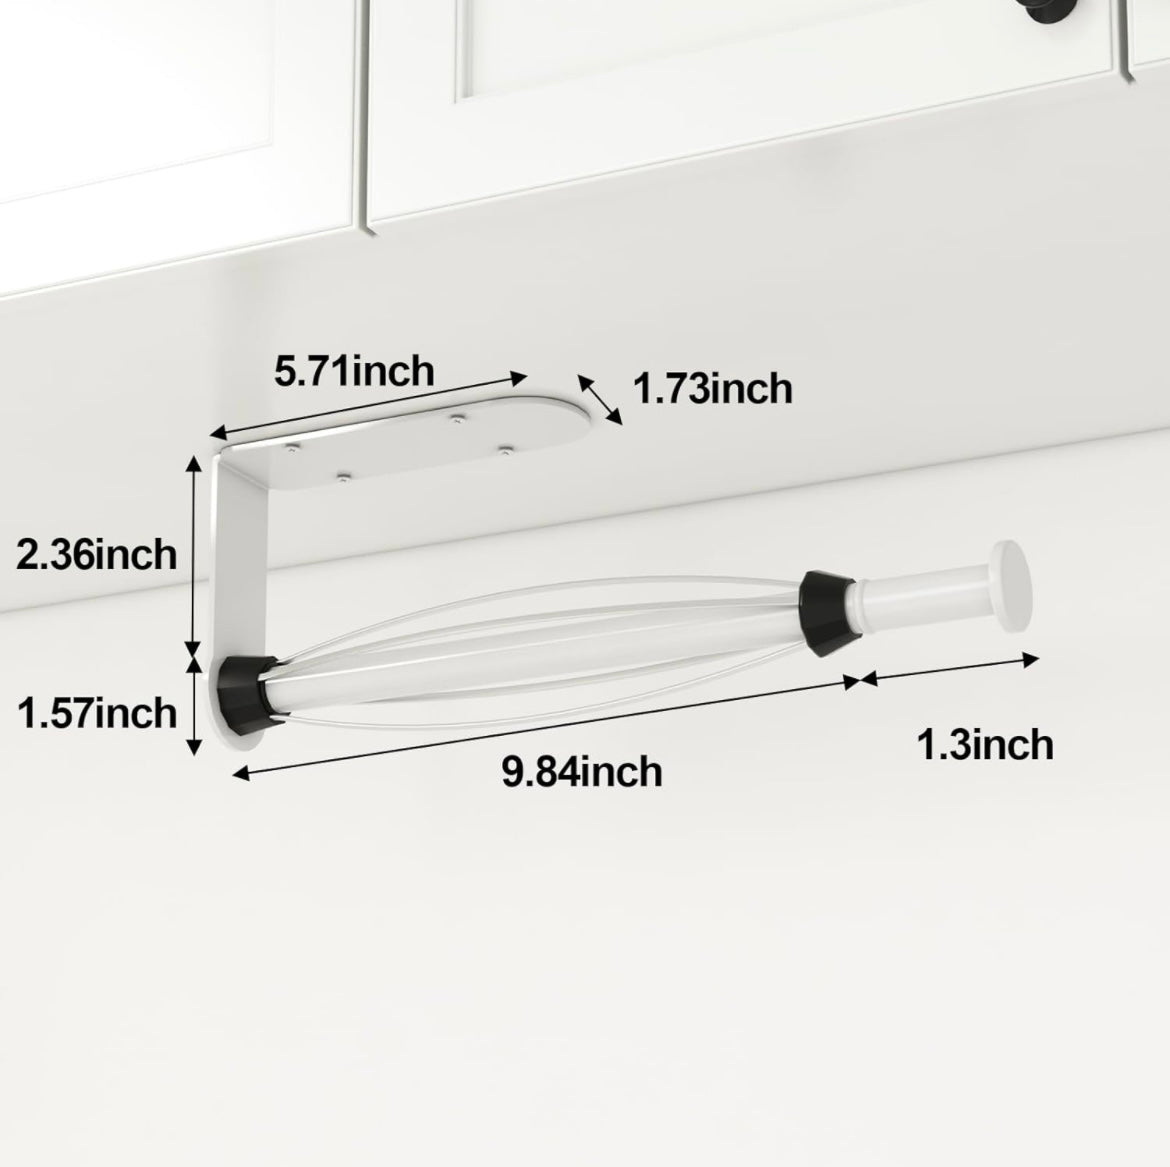 Fixwal Paper Towel Holder Under Cabinet, Single Hand Operable Wall Mount Paper Towel Holder with Damping Effect, Bend-Resistant, Self-Adhesive or Drill Mounting for Kitchen Bathroom, White